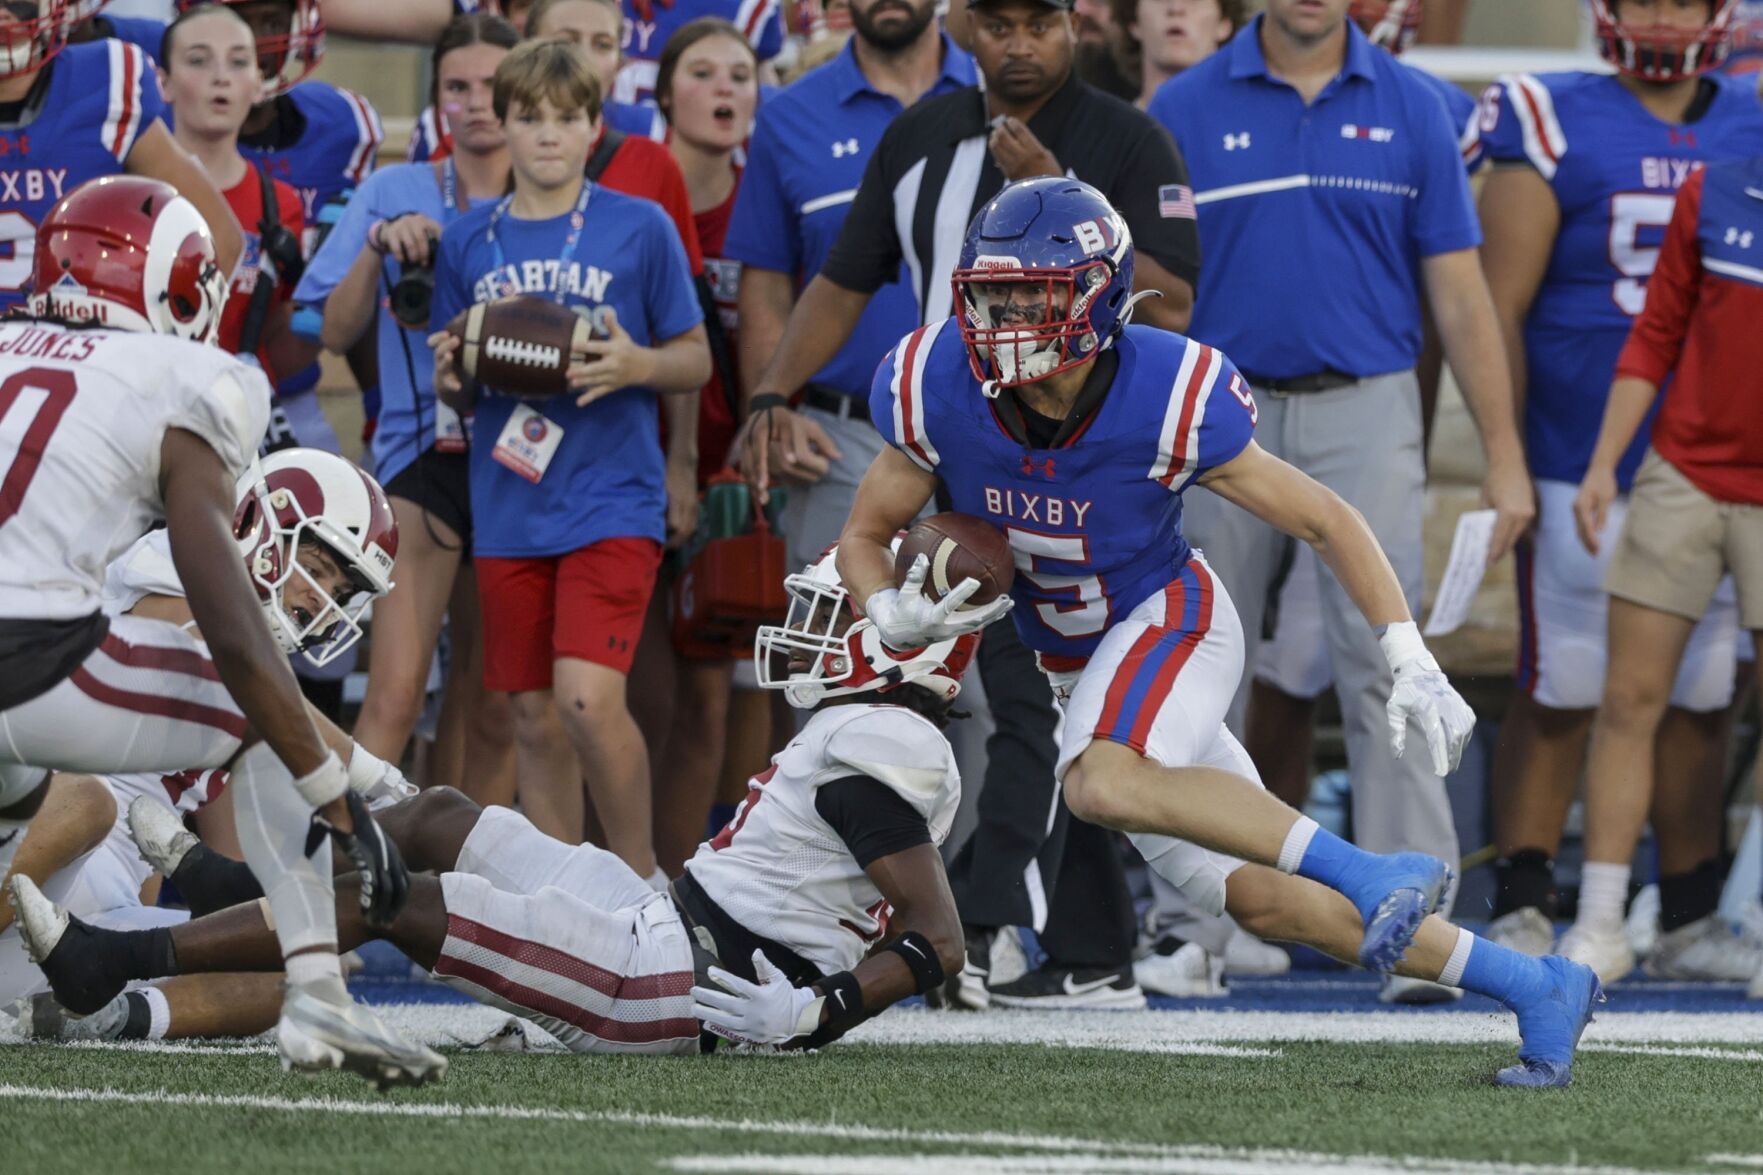 Morning after analysis: Bixby, Union impressive in openers